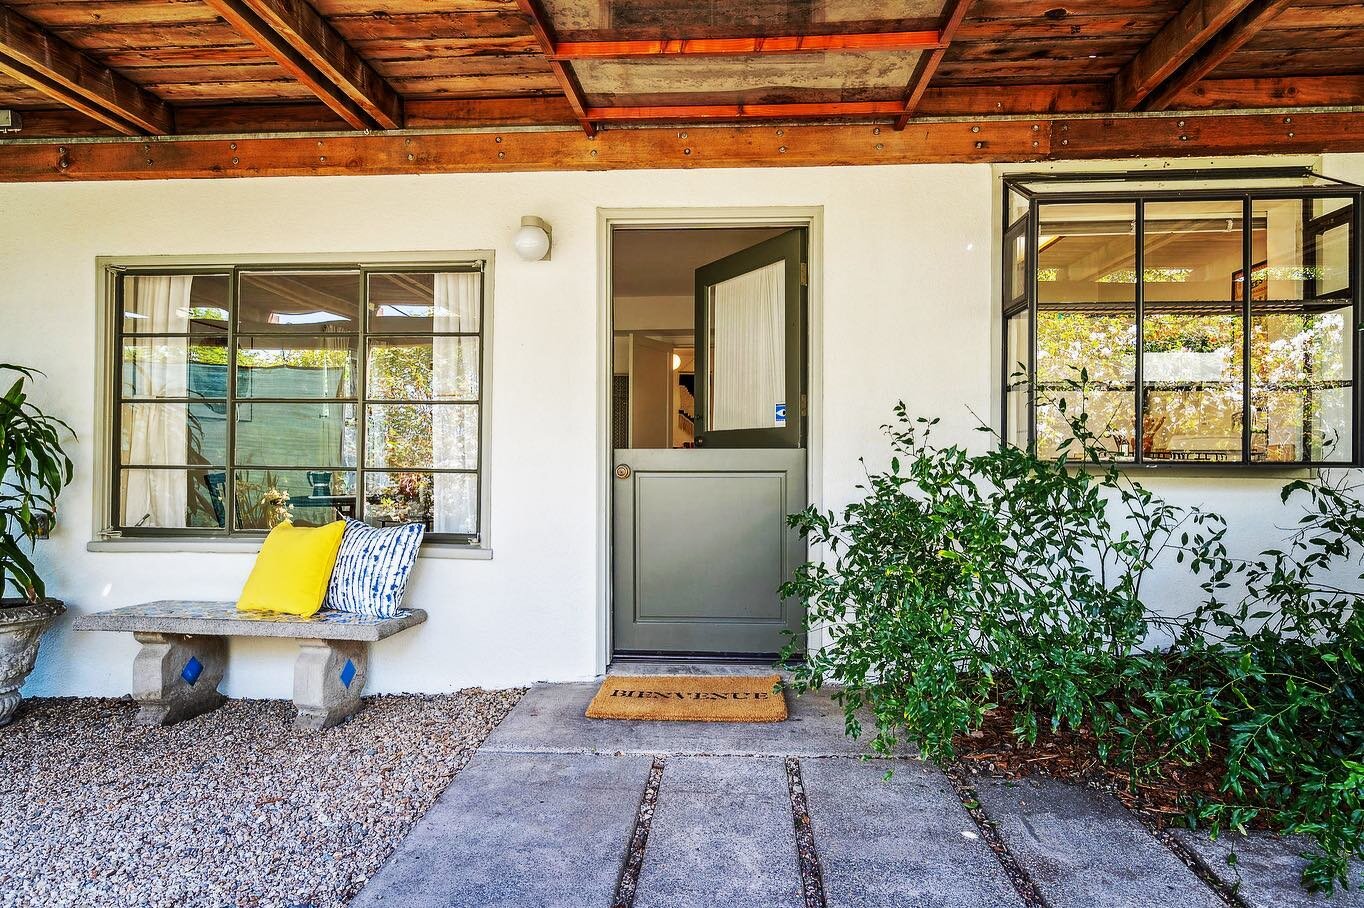 Taylor Swift concerts notwithstanding, the (second)hottest ticket this summer is the Accessory Dwelling Unit. My most recent listing had a garden ADU that buyers went mad for; the house received 13 offers and sold for 49% over list. Two of my buyers 